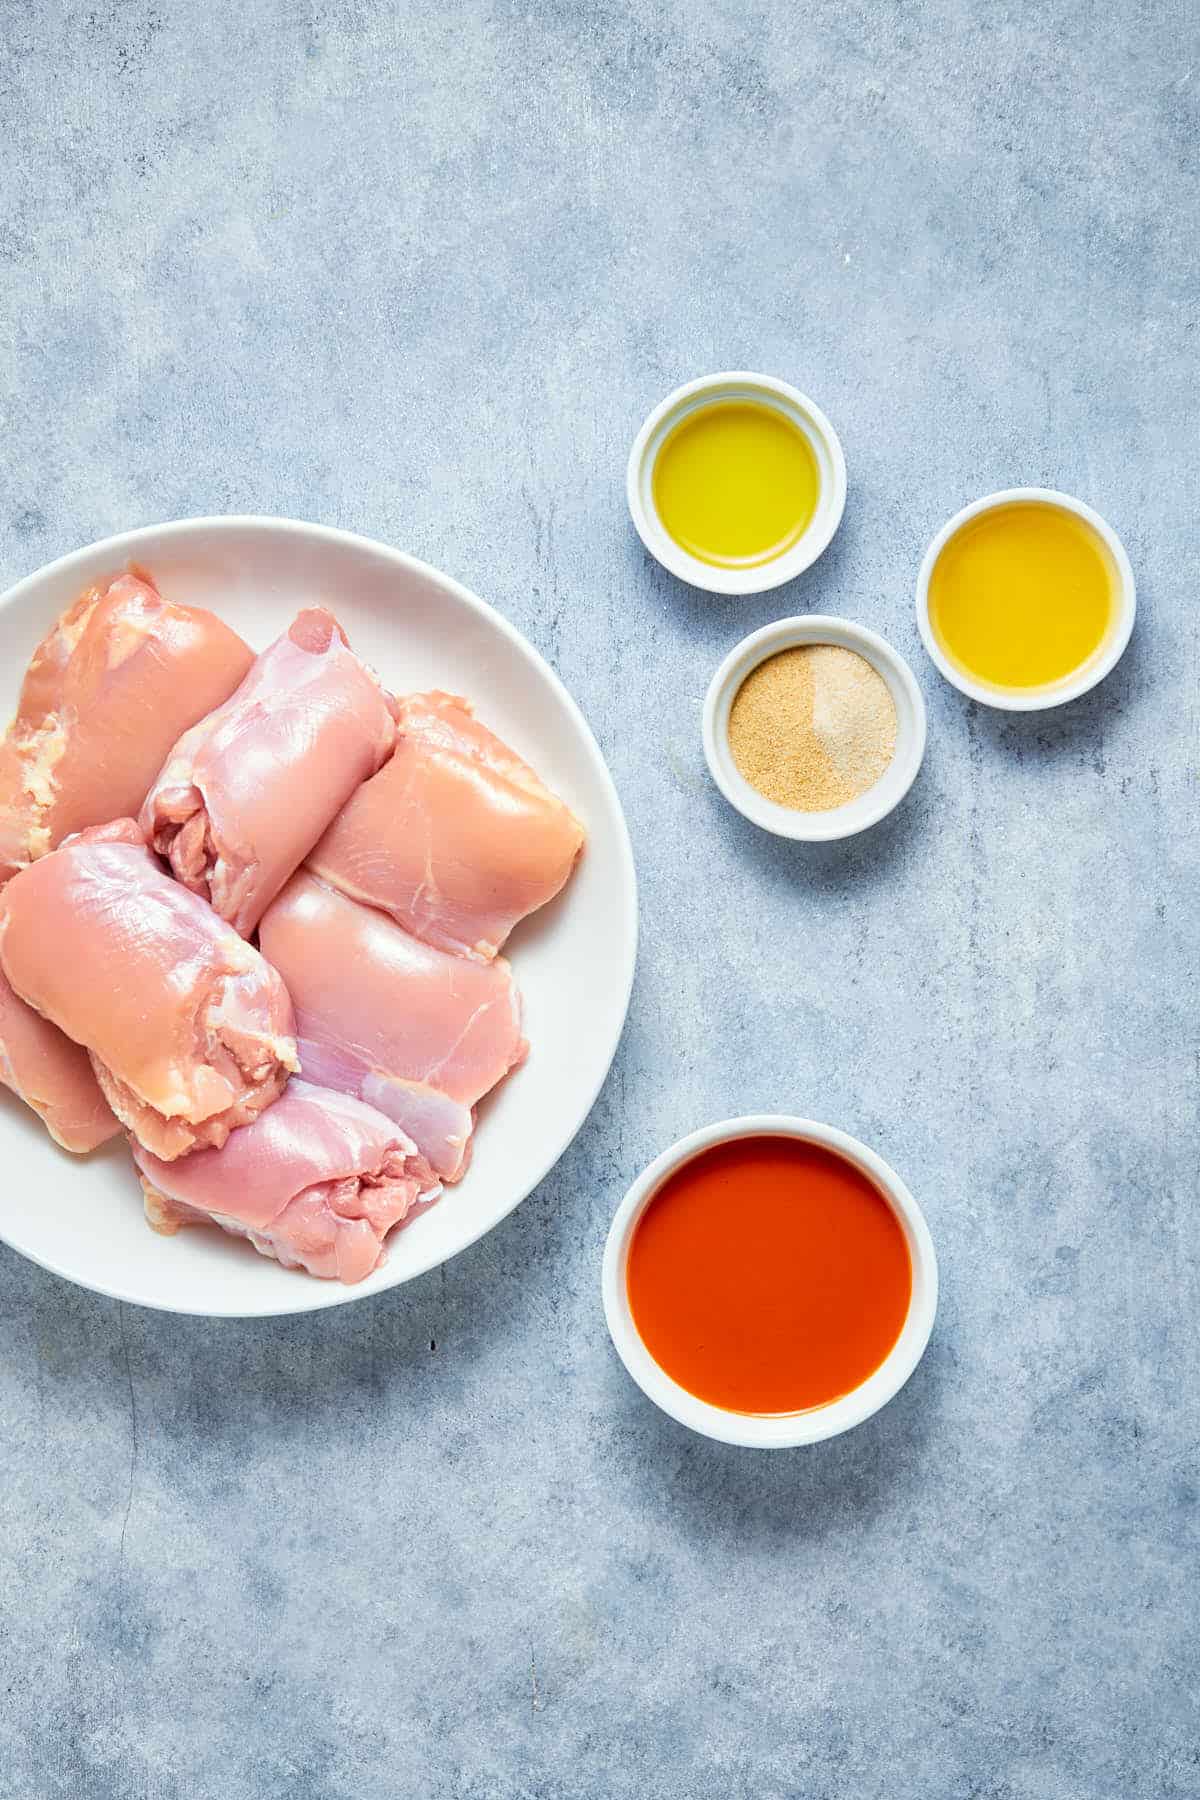 Ingredients to make buffalo chicken thighs.